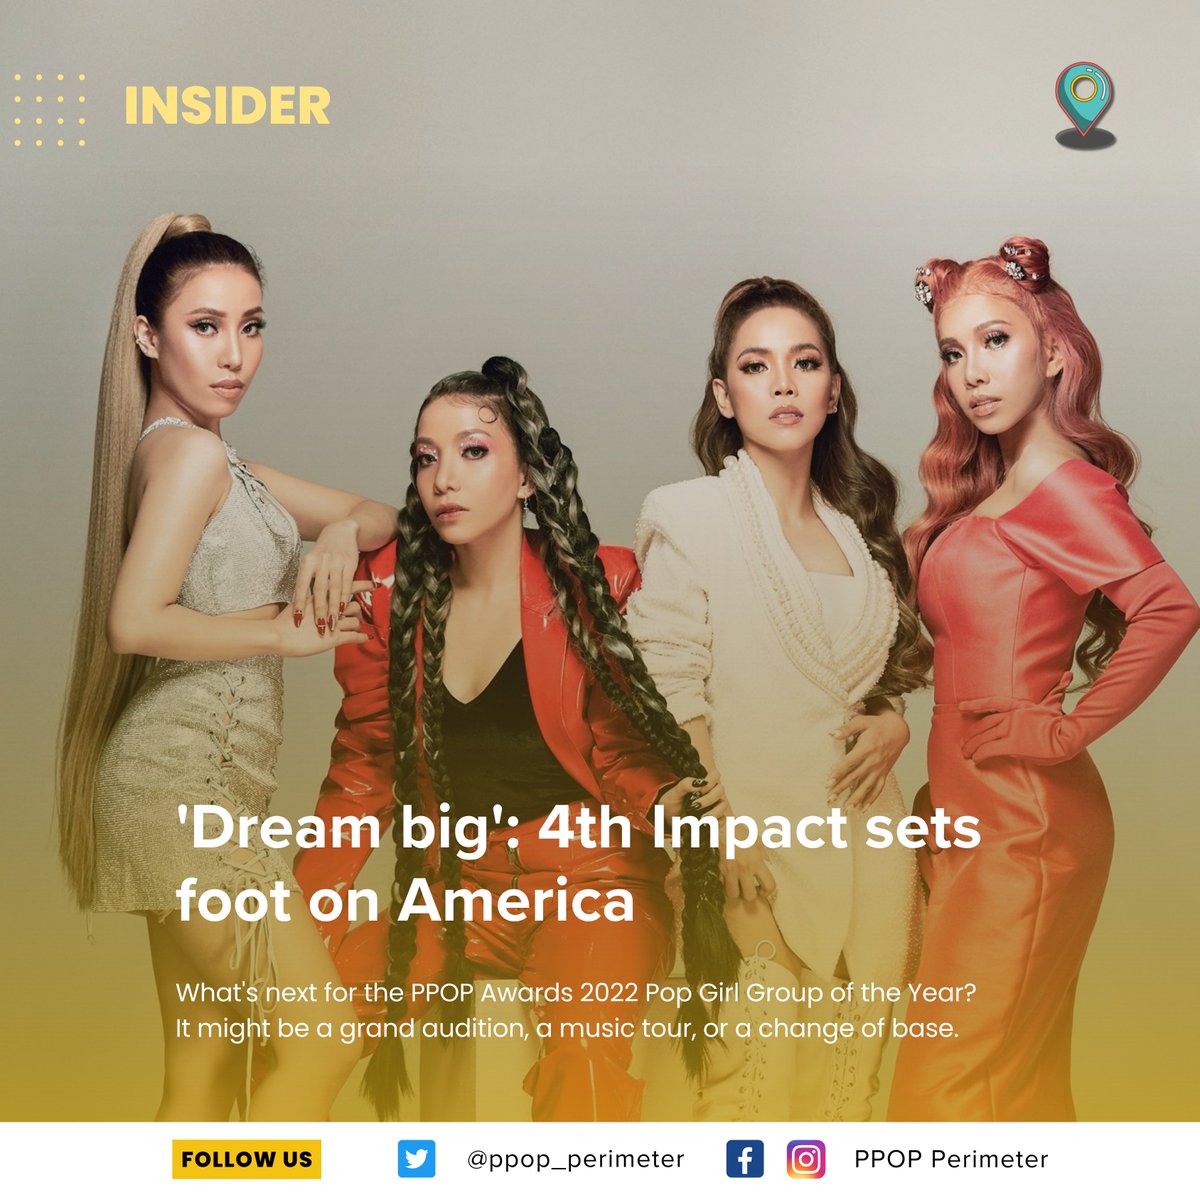 RT @SB19x4THIMPACT1: RT @ppop_perimeter: INSIDER: @4thImpactMusic flew to Los Angeles, California last April 5, but the exact reason remains unclear.

In separate Instagram posts, Almira, Mylene, Celina, and Irene flaunted their visits to relatives, shop…